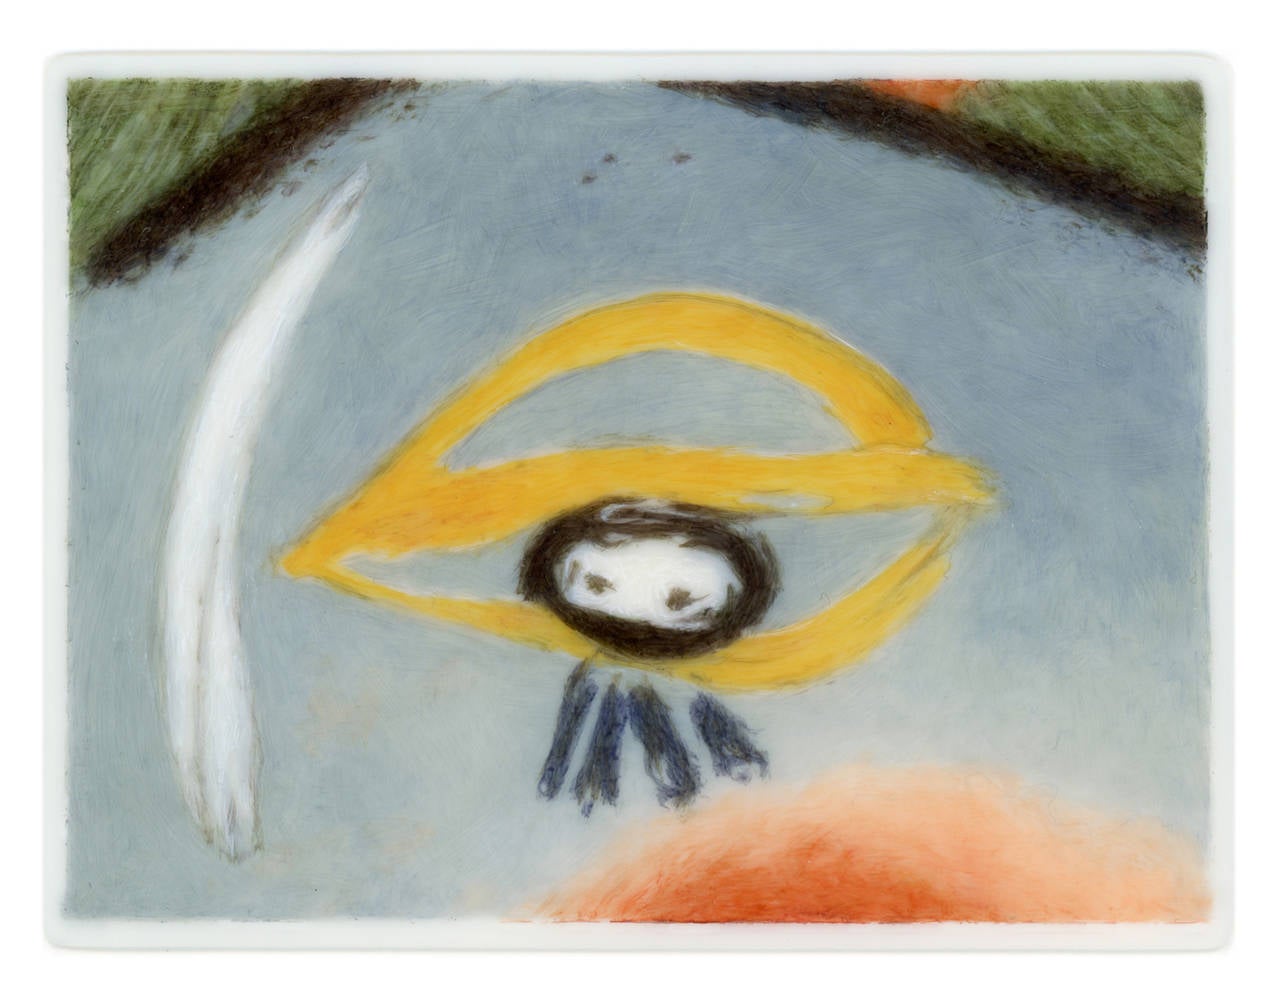 Lover's Eye III: Lee (after Picasso) - Painting by Tabitha Vevers